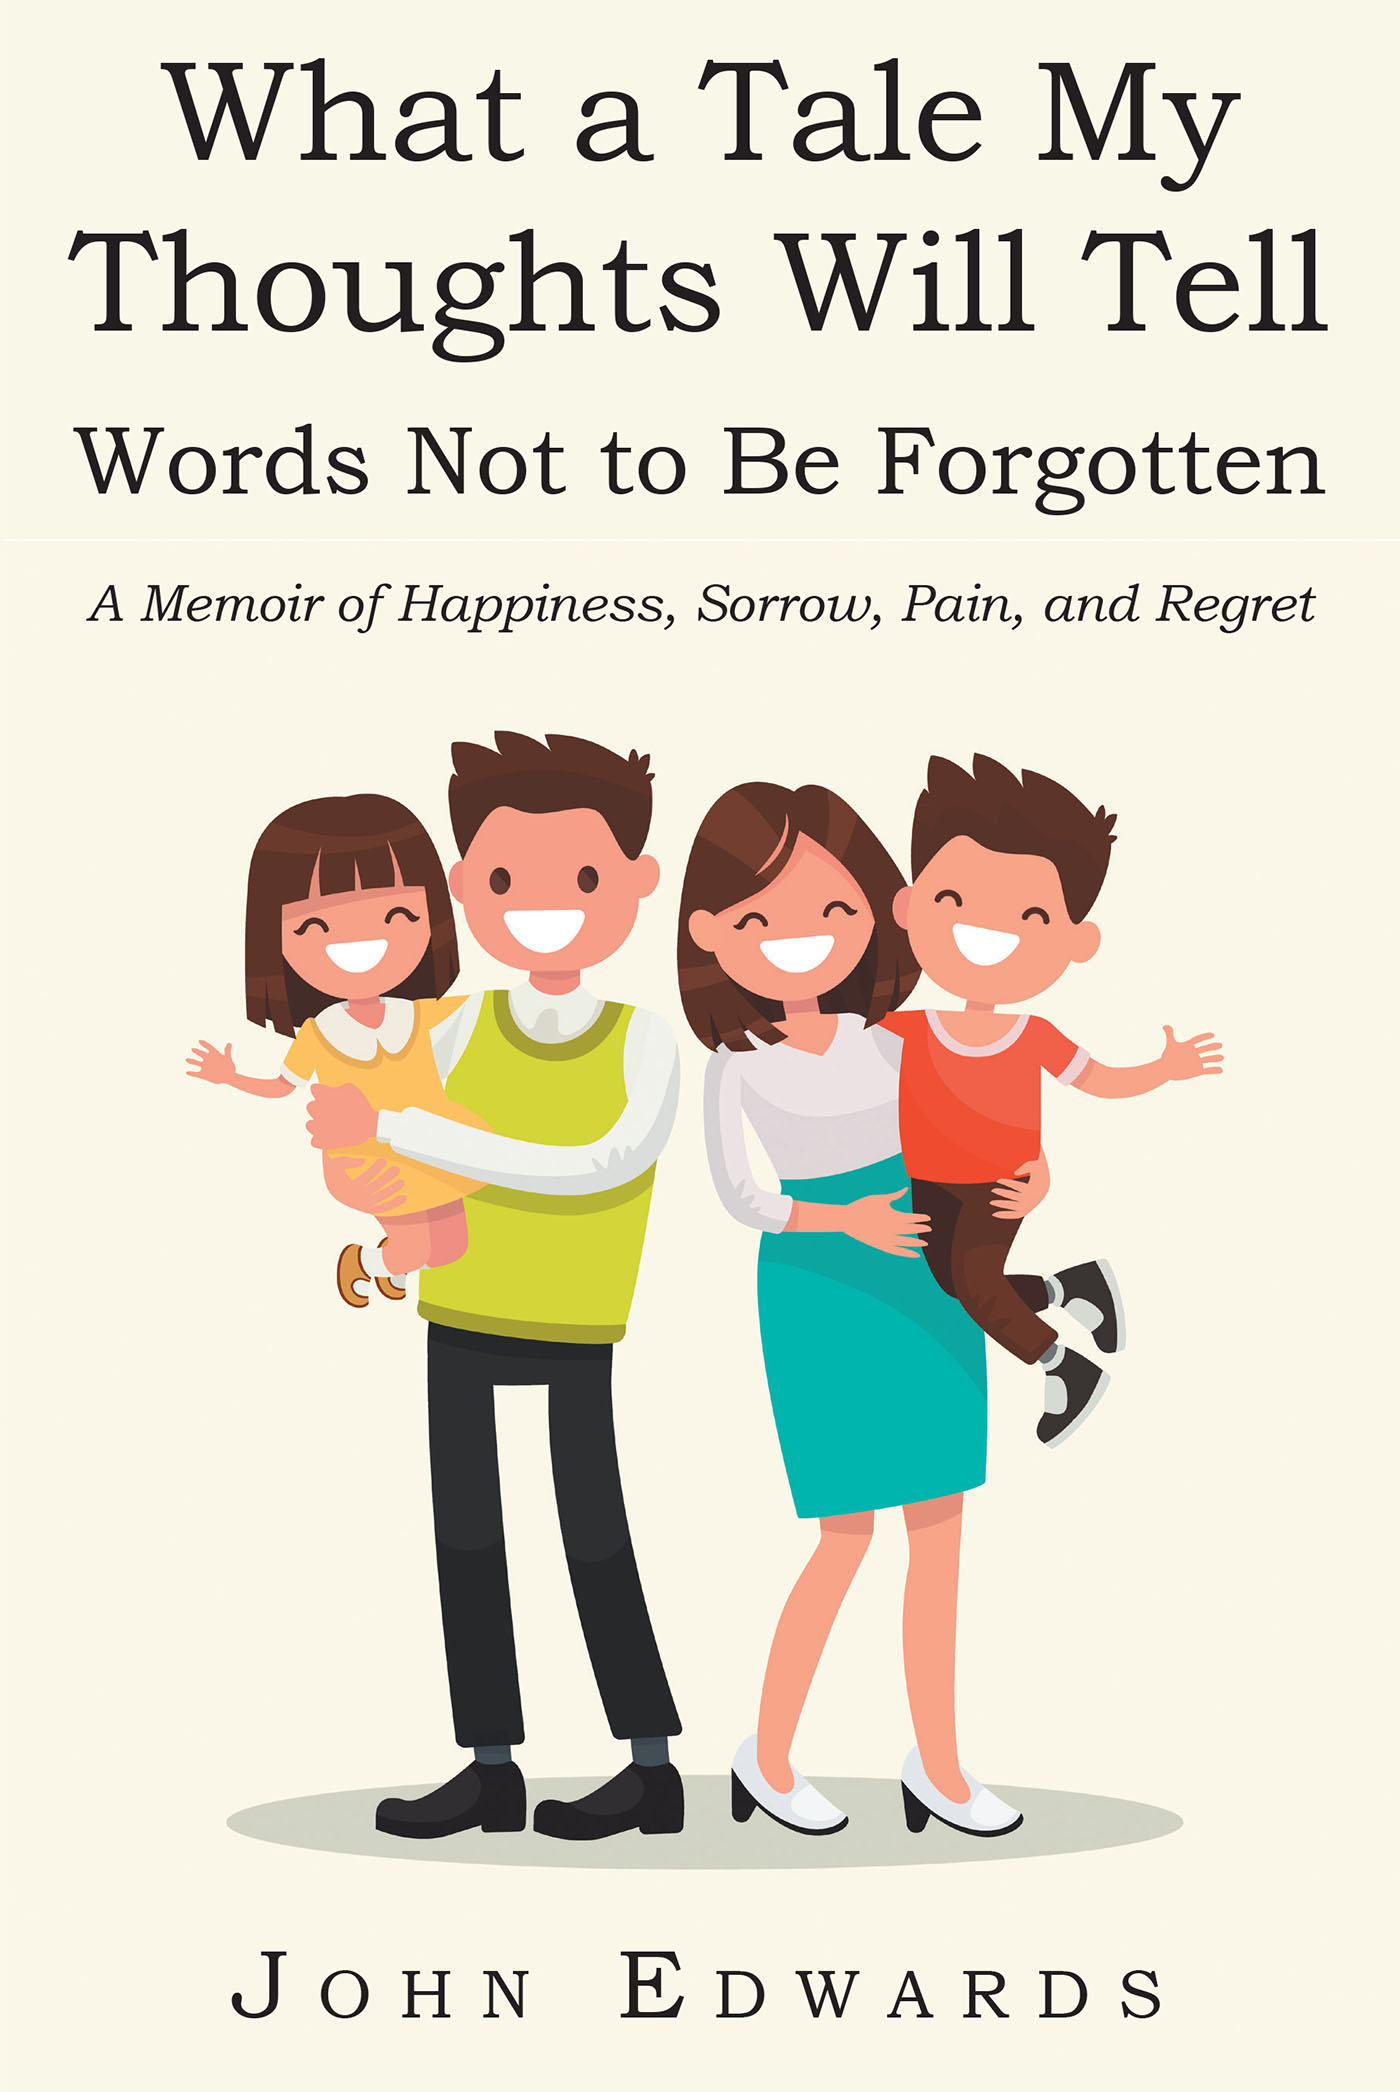 John Edwards’ New Book, “What a Tale My Thoughts Will Tell: Words Not to Be Forgotten,” is a Touching Memoir About Family Filled with Songs That Define the Author’s Life